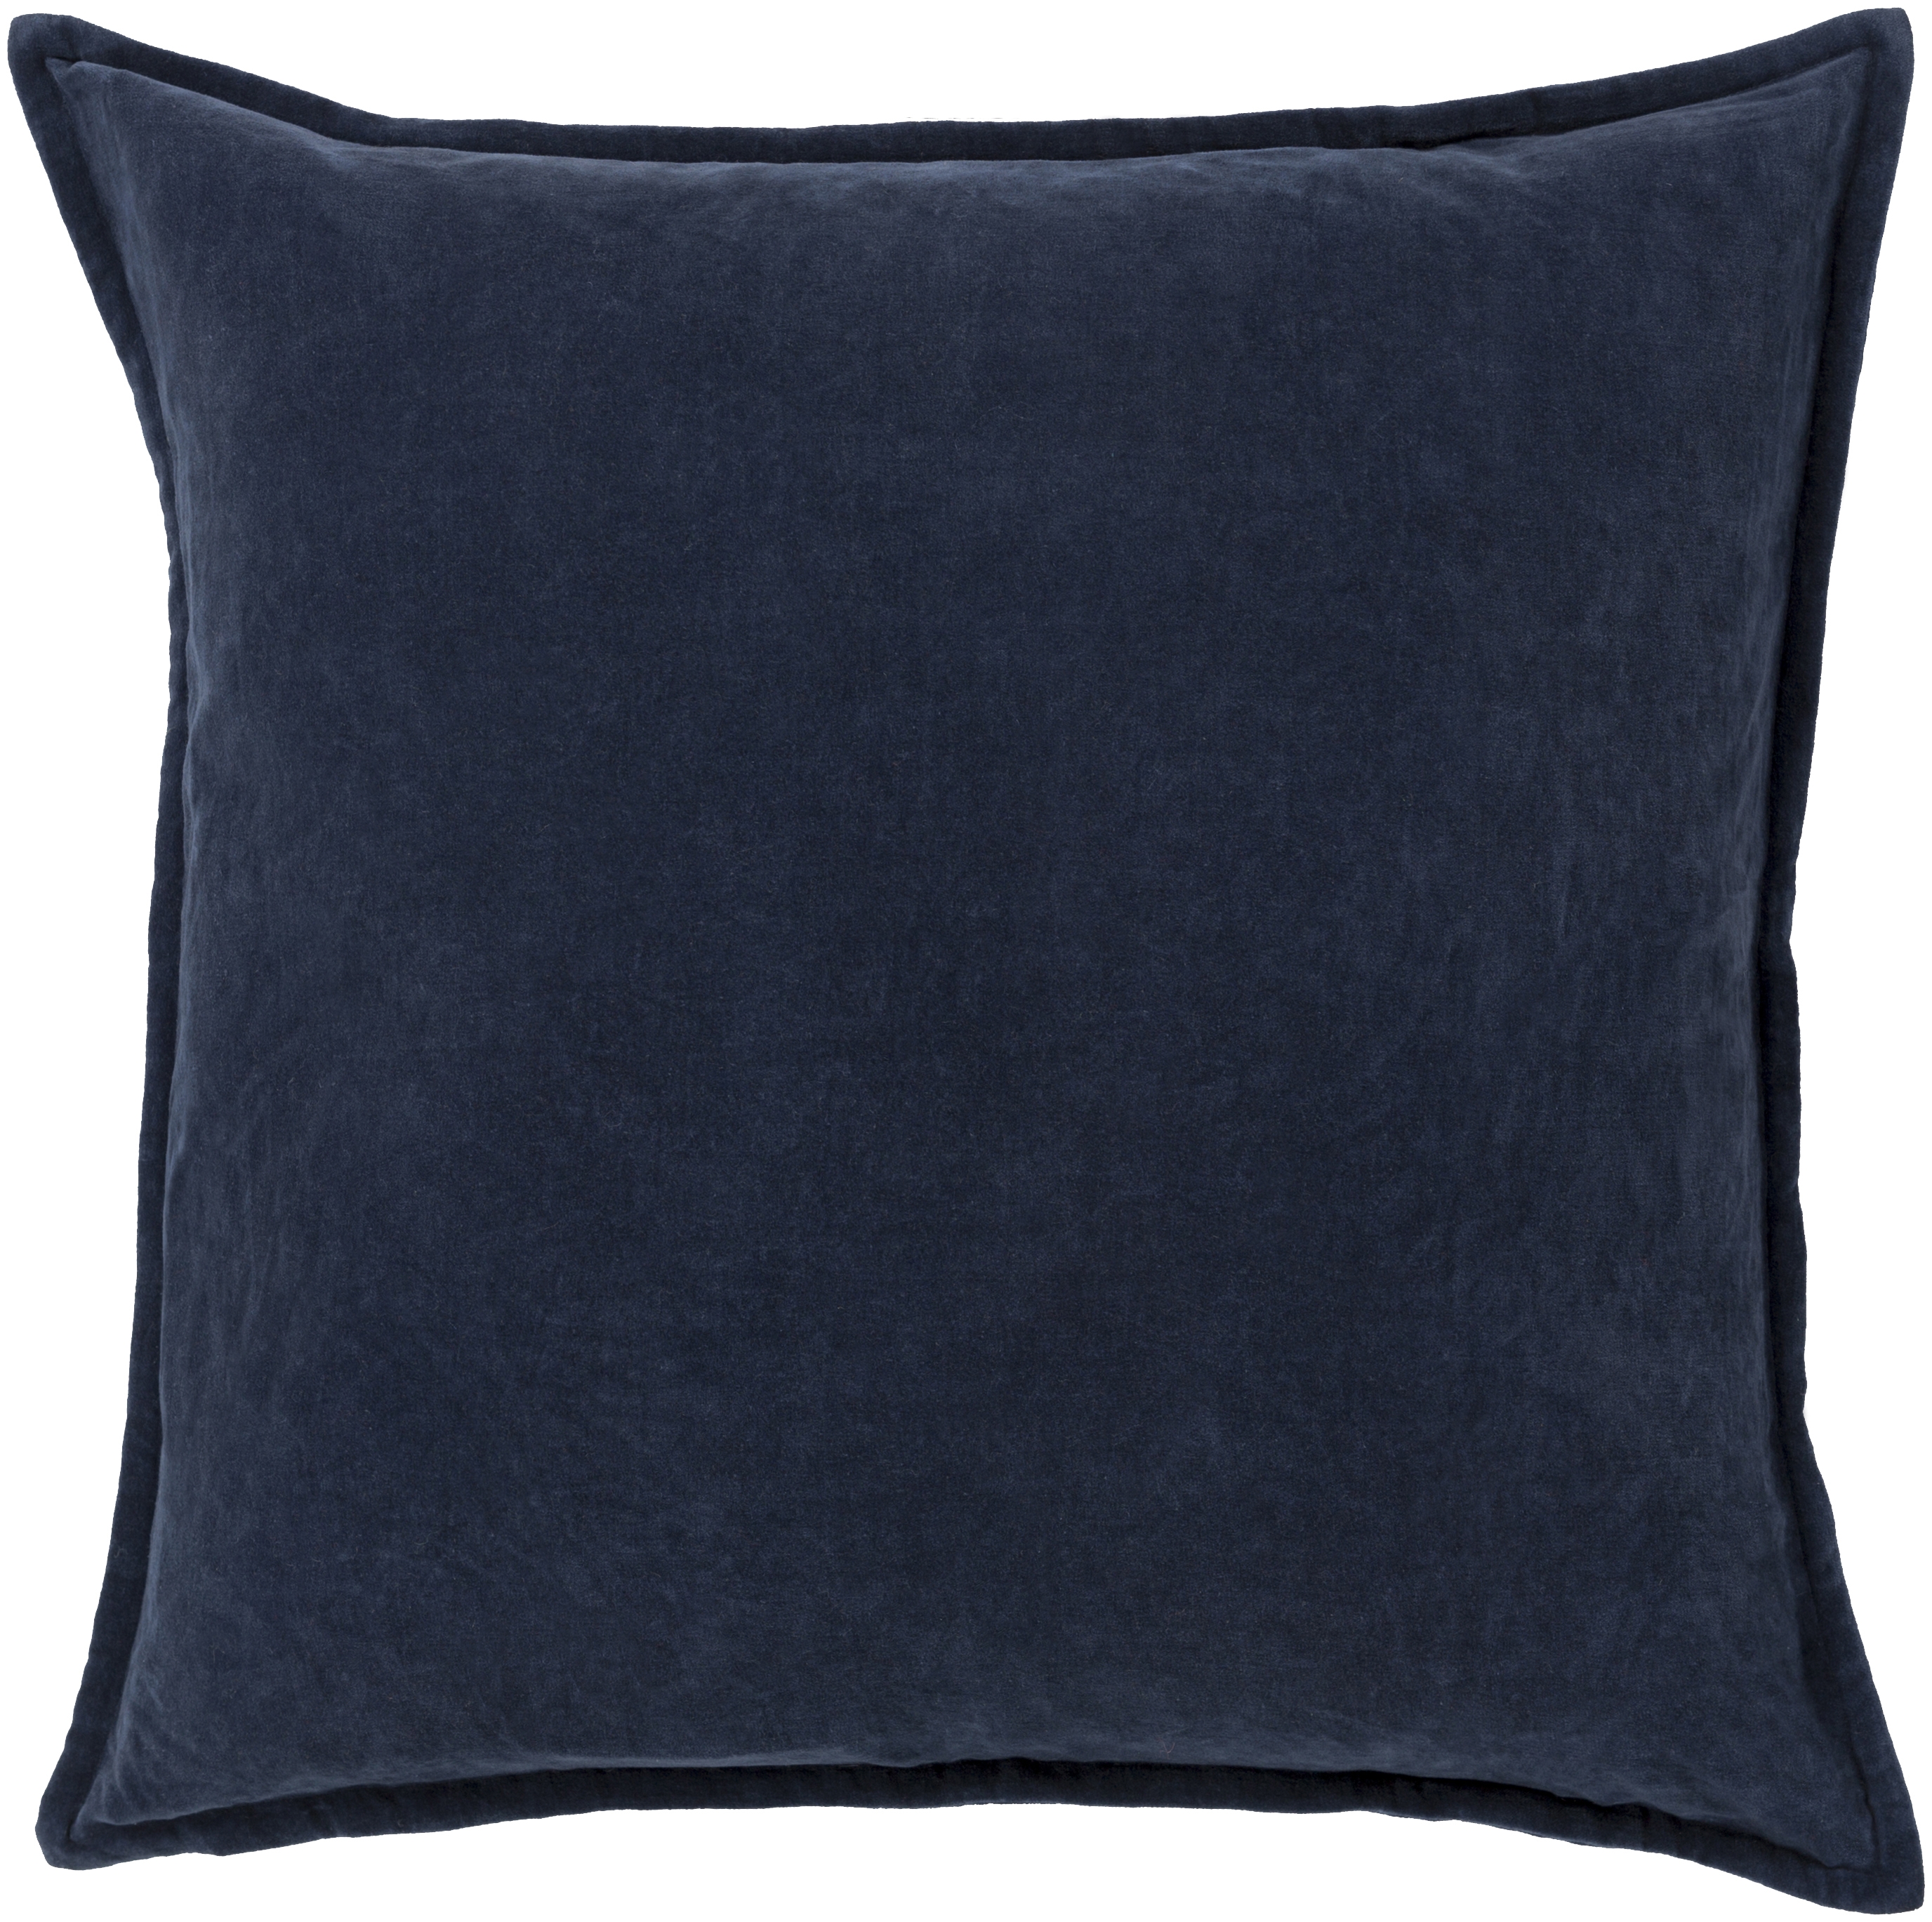 Cotton Velvet Throw Pillow, 22" x 22", with poly insert - Image 0